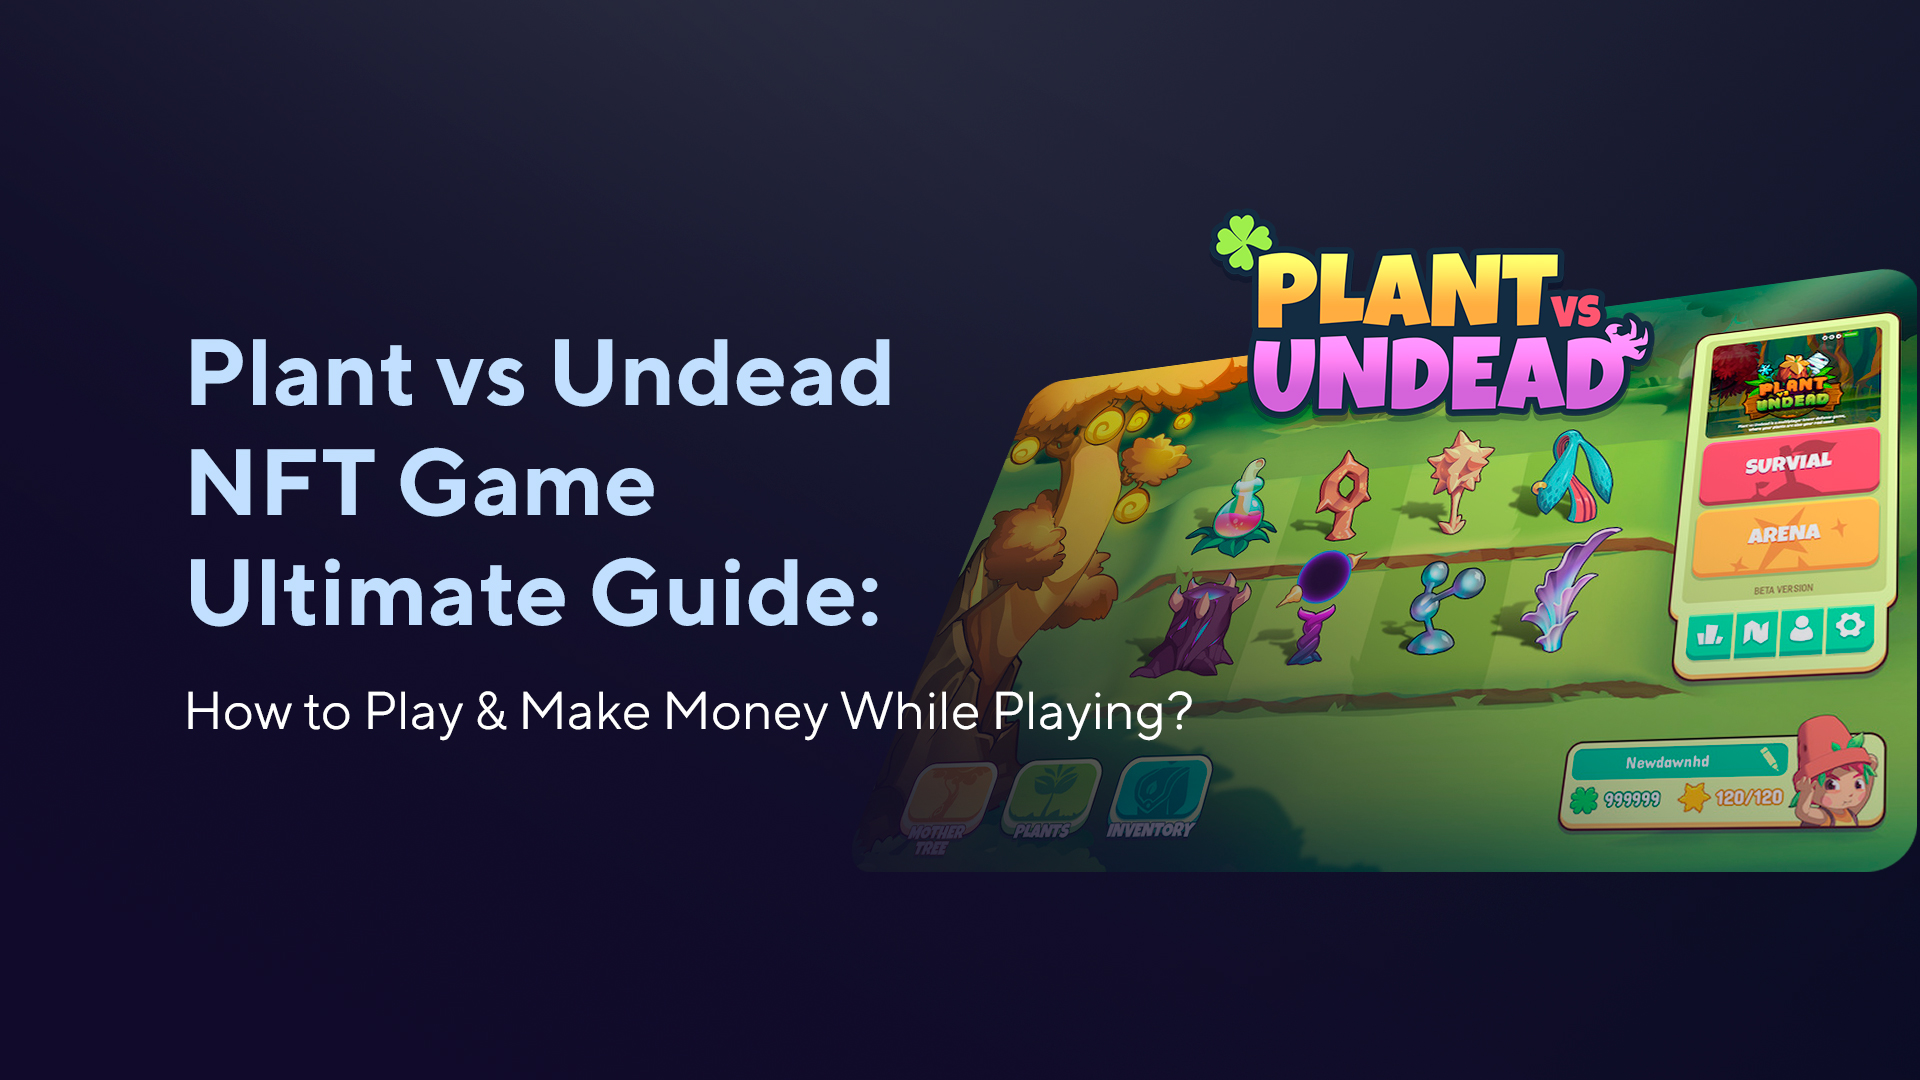 Plant vs Undead NFT Game Ultimate Guide: How to Play & Make Money While Playing?